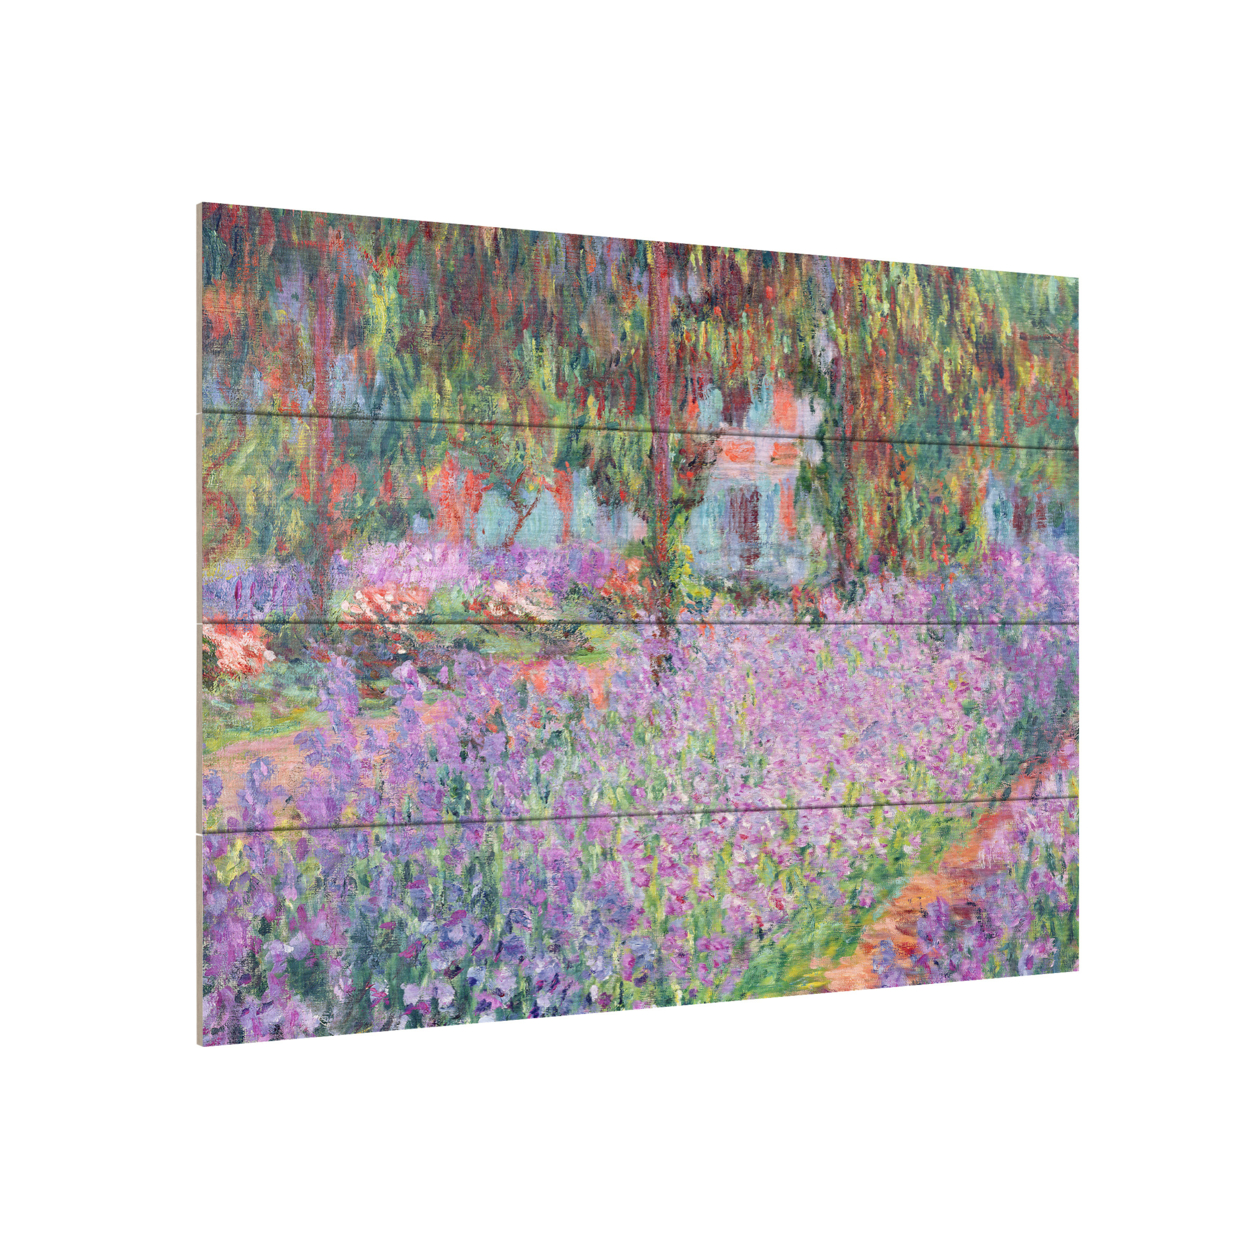 Wall Art 12 X 16 Inches Titled The Artists Garden At Giverny Ready To Hang Printed On Wooden Planks